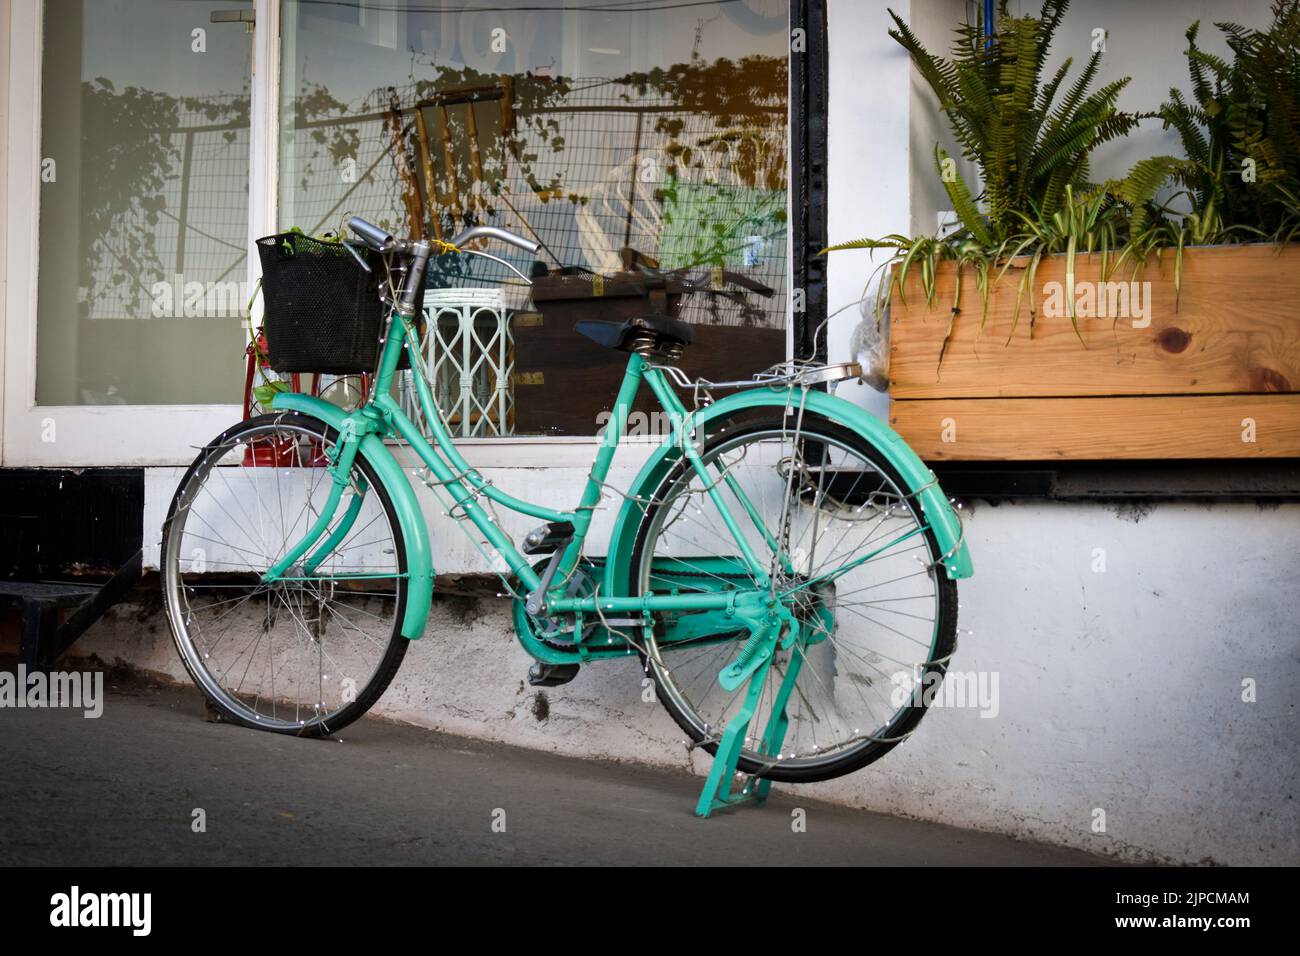 January 1st 2020 Mussoorie Uttarakhand India. A light green antique decorative ladies bicycle with basket outside a cafe for decorative purposes. Stock Photo